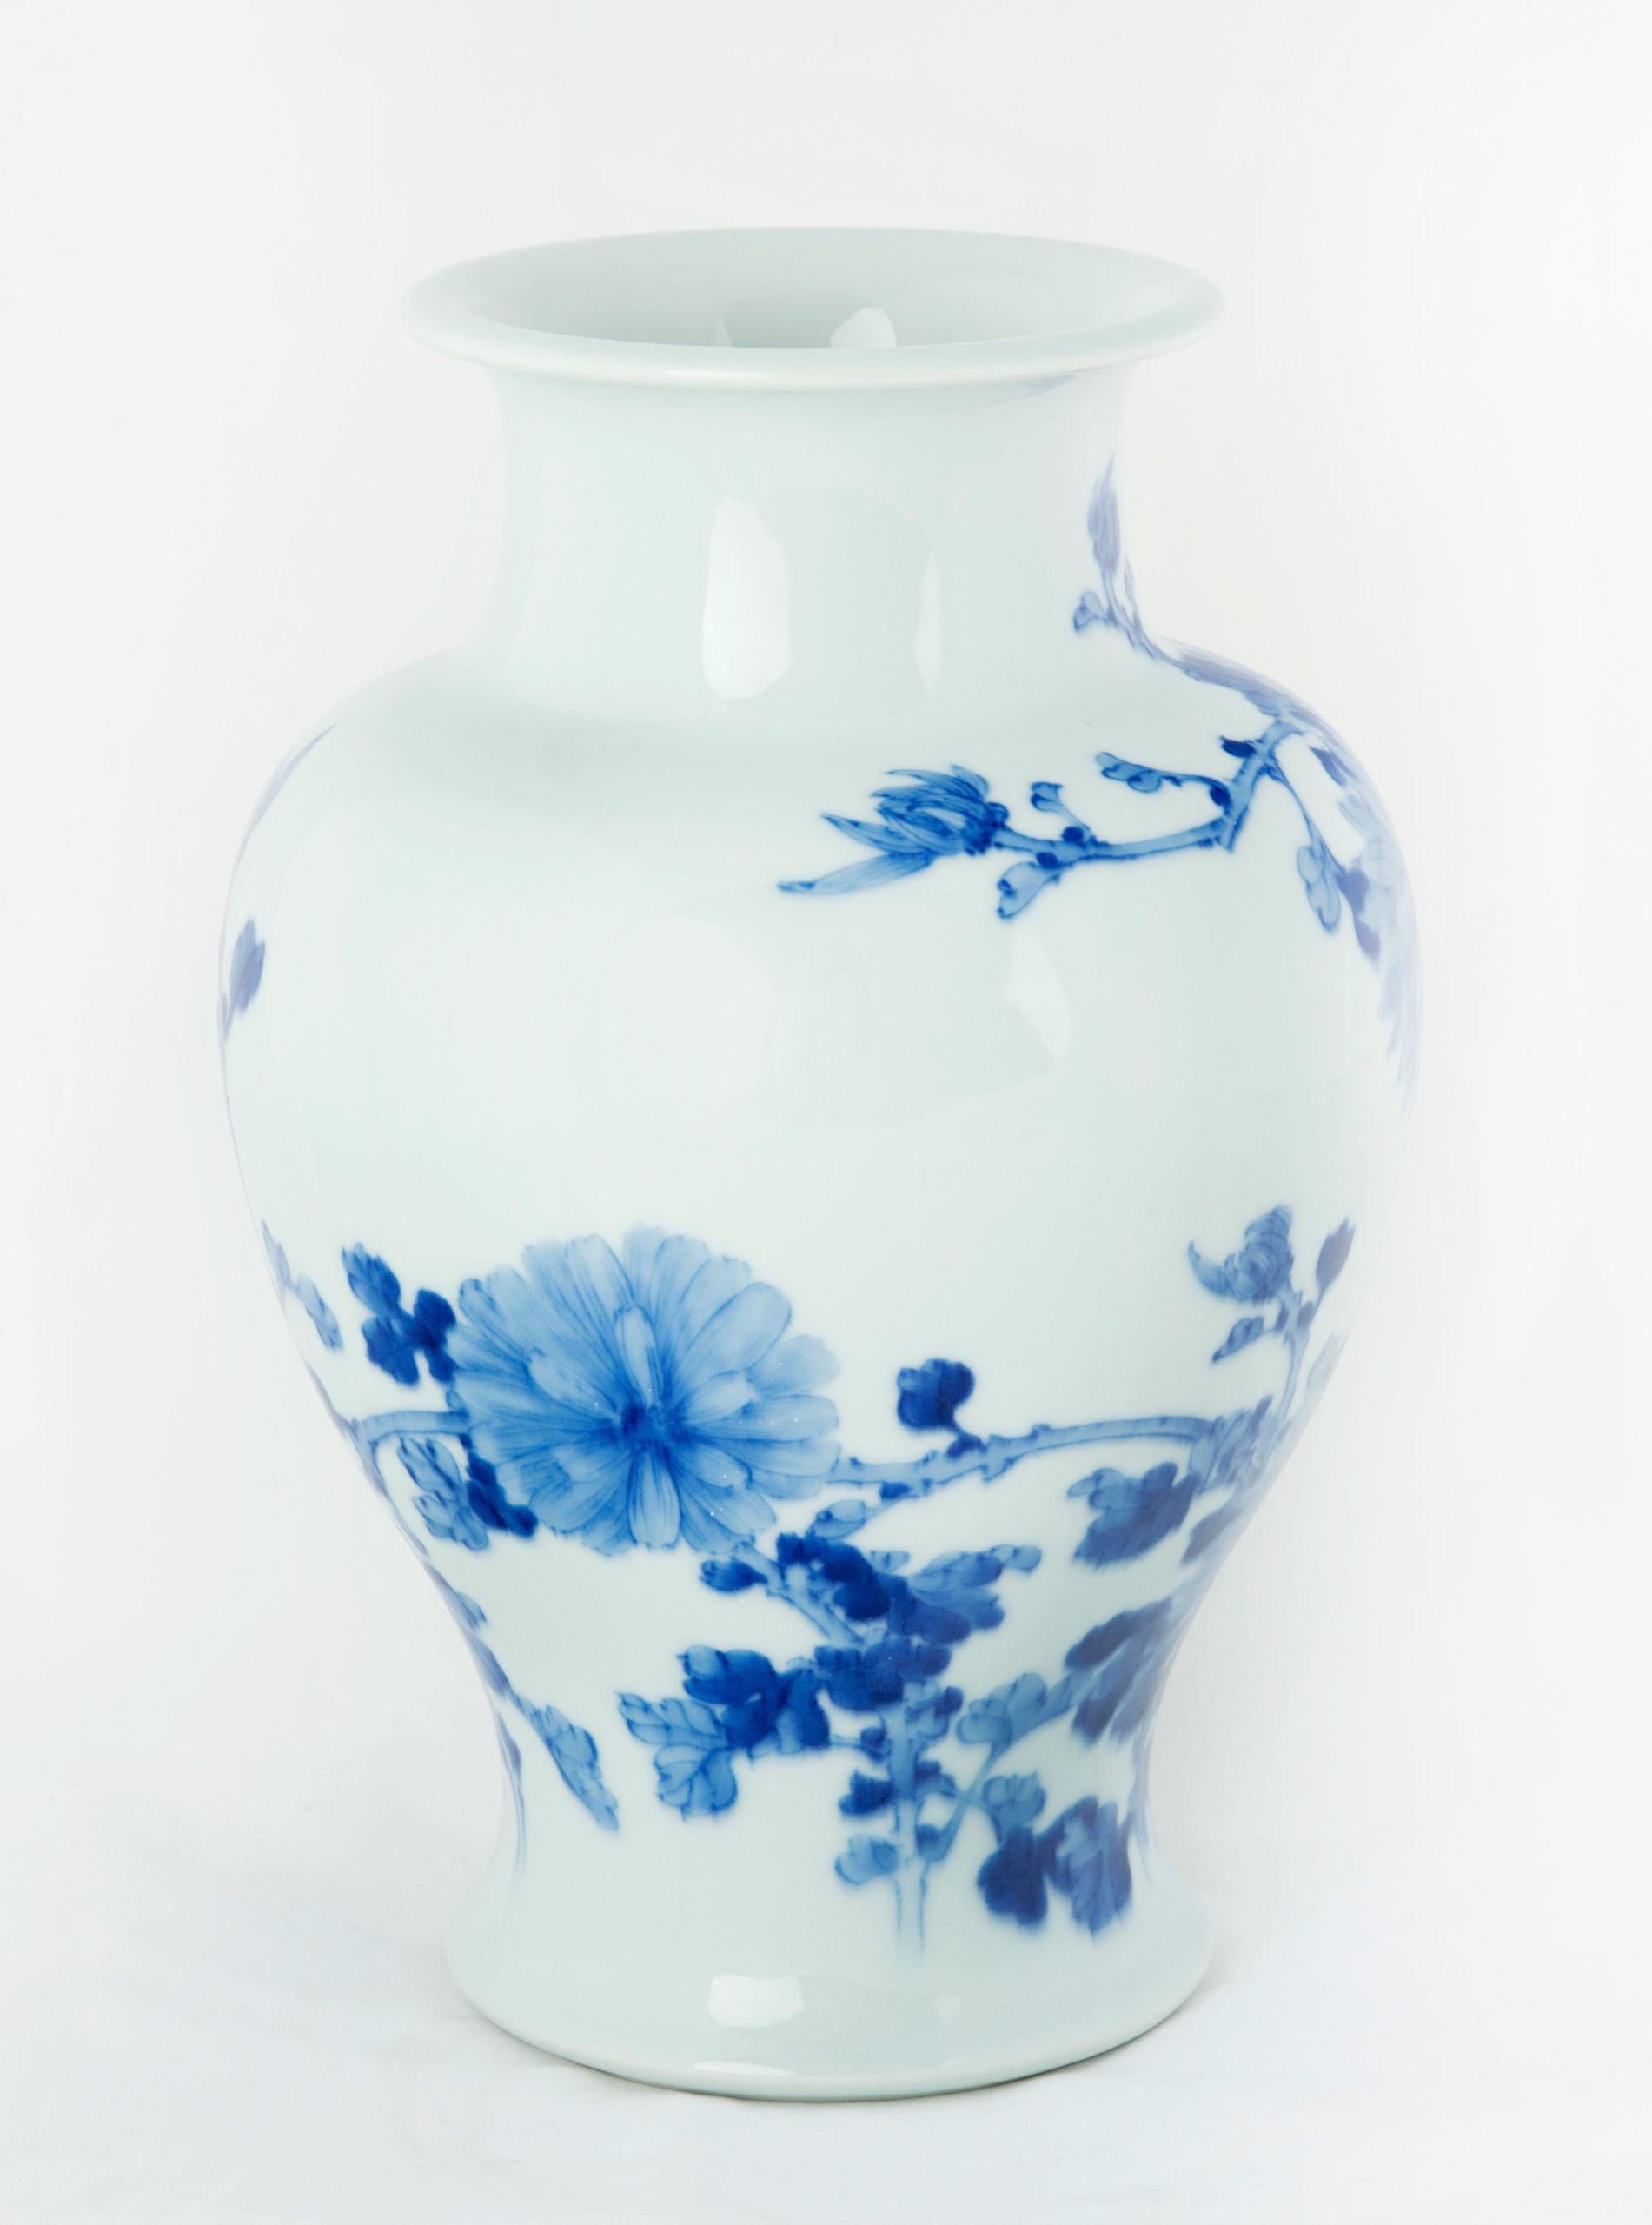 As part of our Japanese works of art collection we are delighted to offer this charming Meiji Period 1868-1912, ceramic baluster vase from the studios of the highly coveted Imperial artist Miyagawa Makuzu Kozan 1842-1916, on this occasion Kozan II